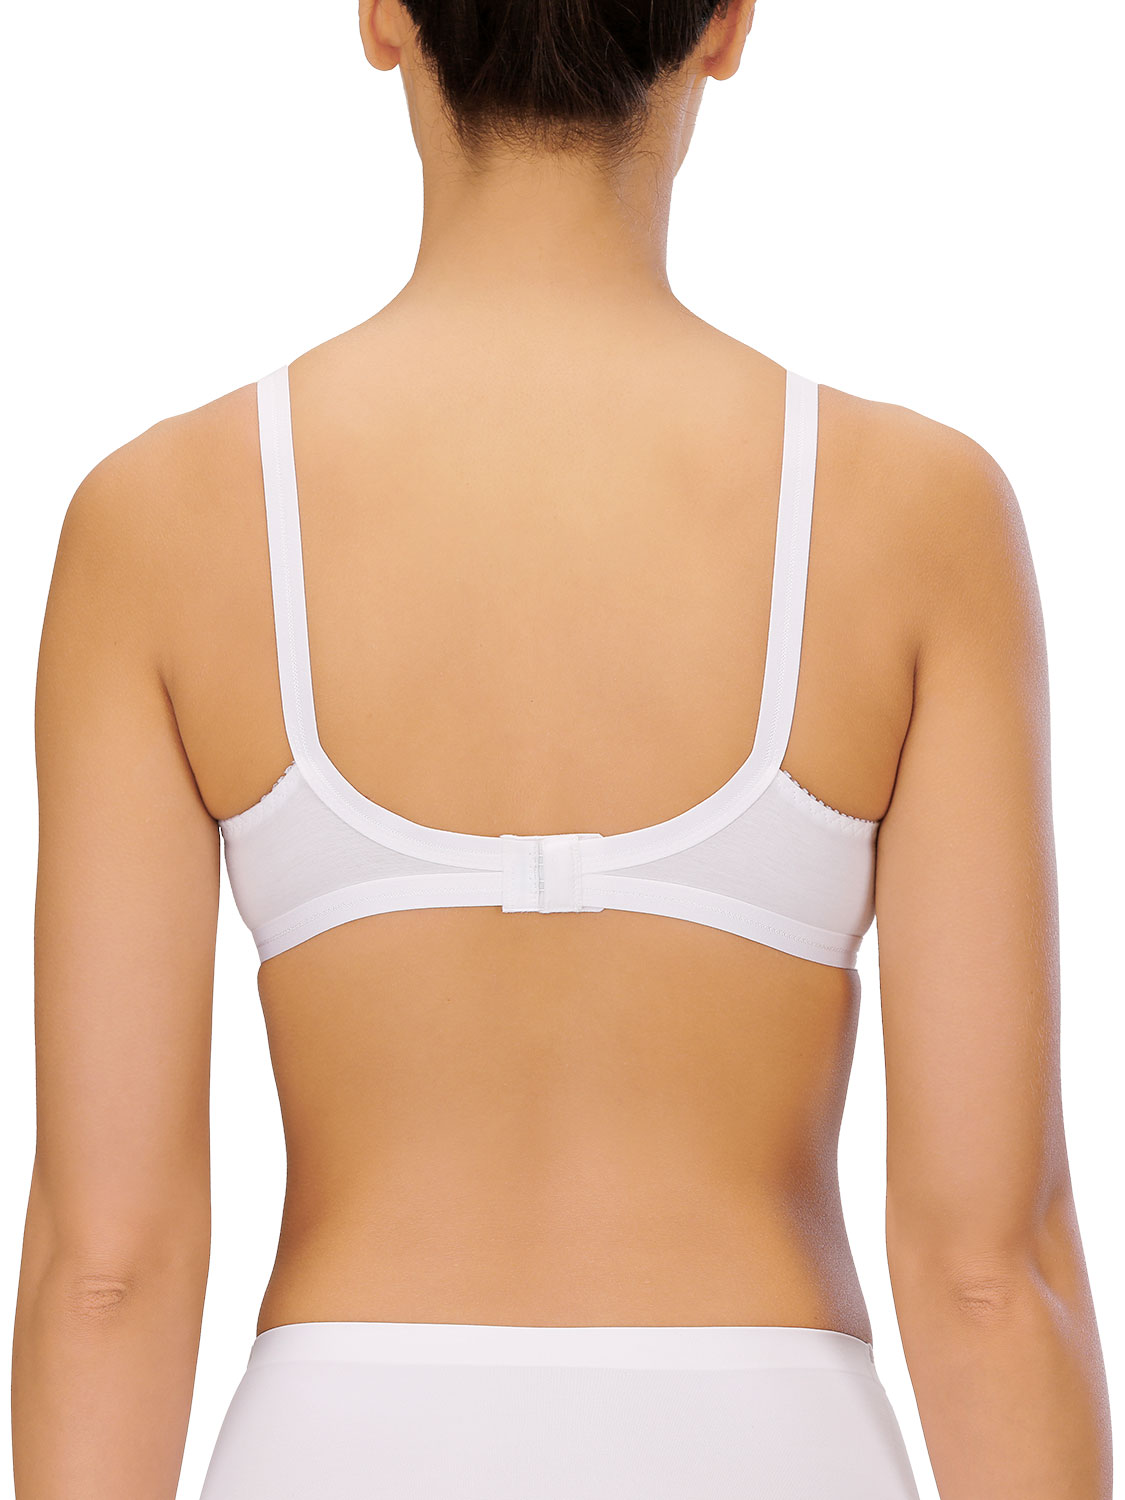 Details about   32F Pack Of 3 Naturana Non Wired Soft Cup Bra 86666 